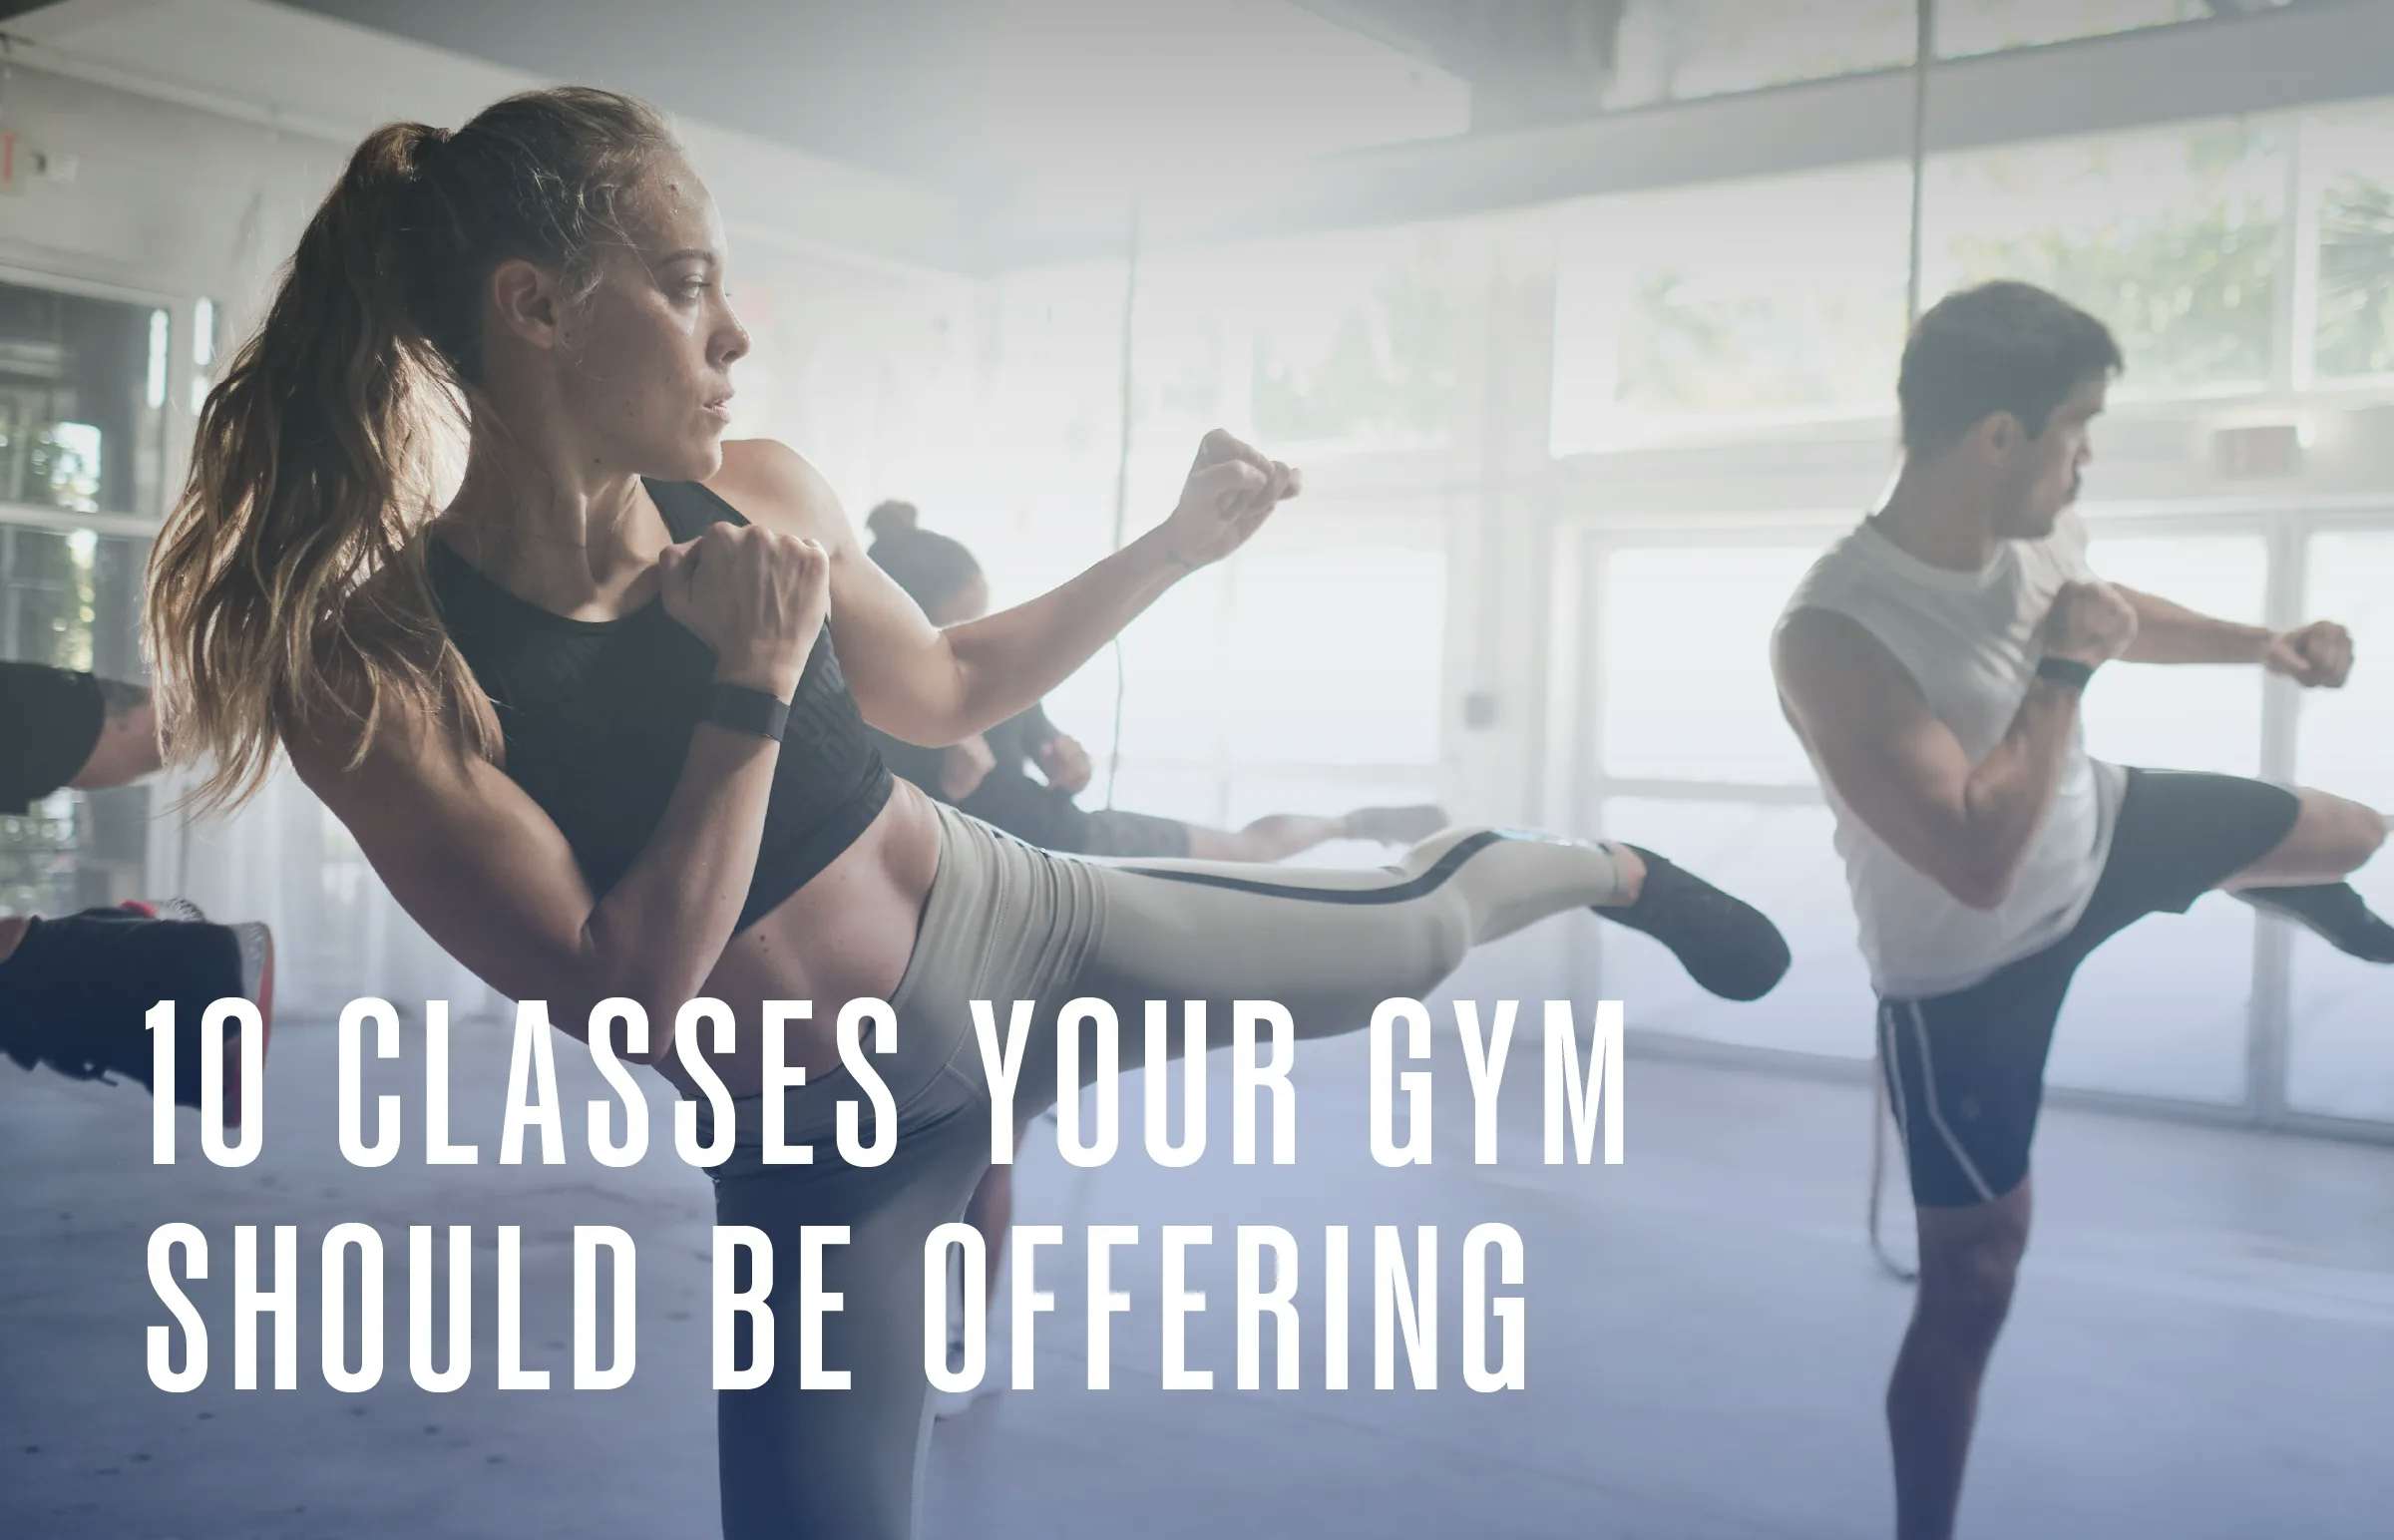 10 Classes Your Gym Should Be Offering